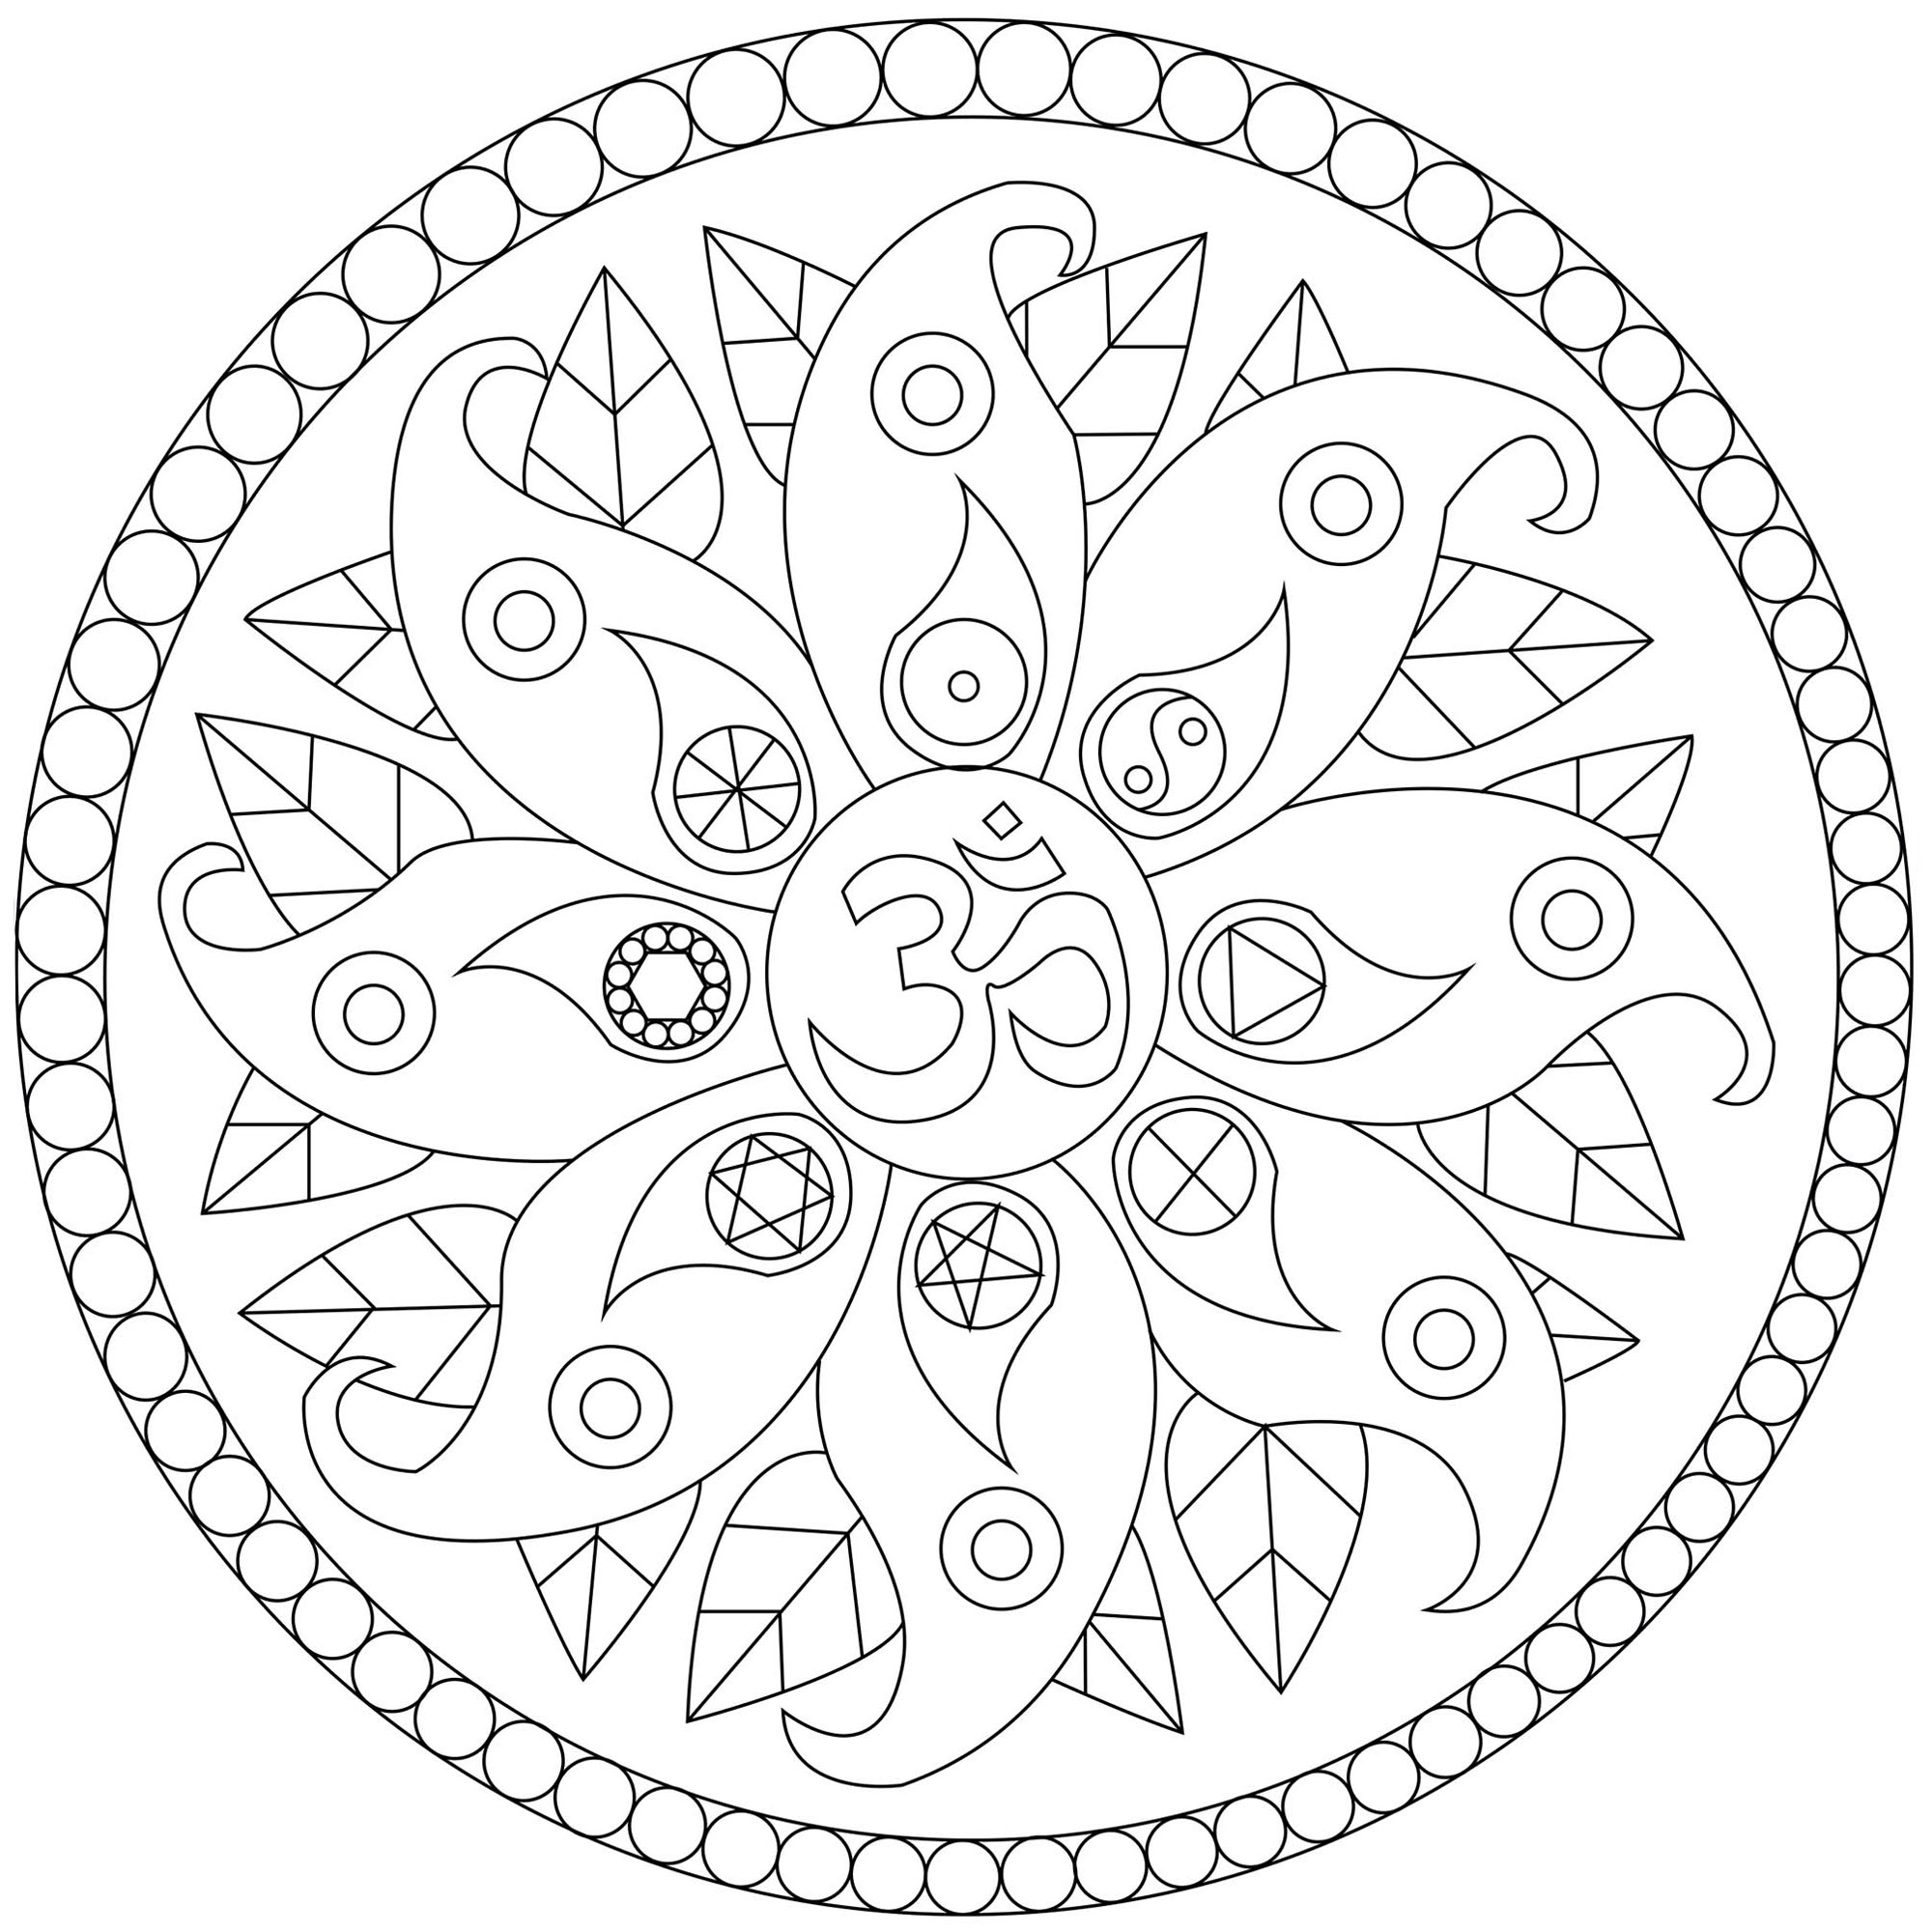 Mandala with various symbols : Om, Yin and Yang ... A coloring page full a peace, Artist : Caillou